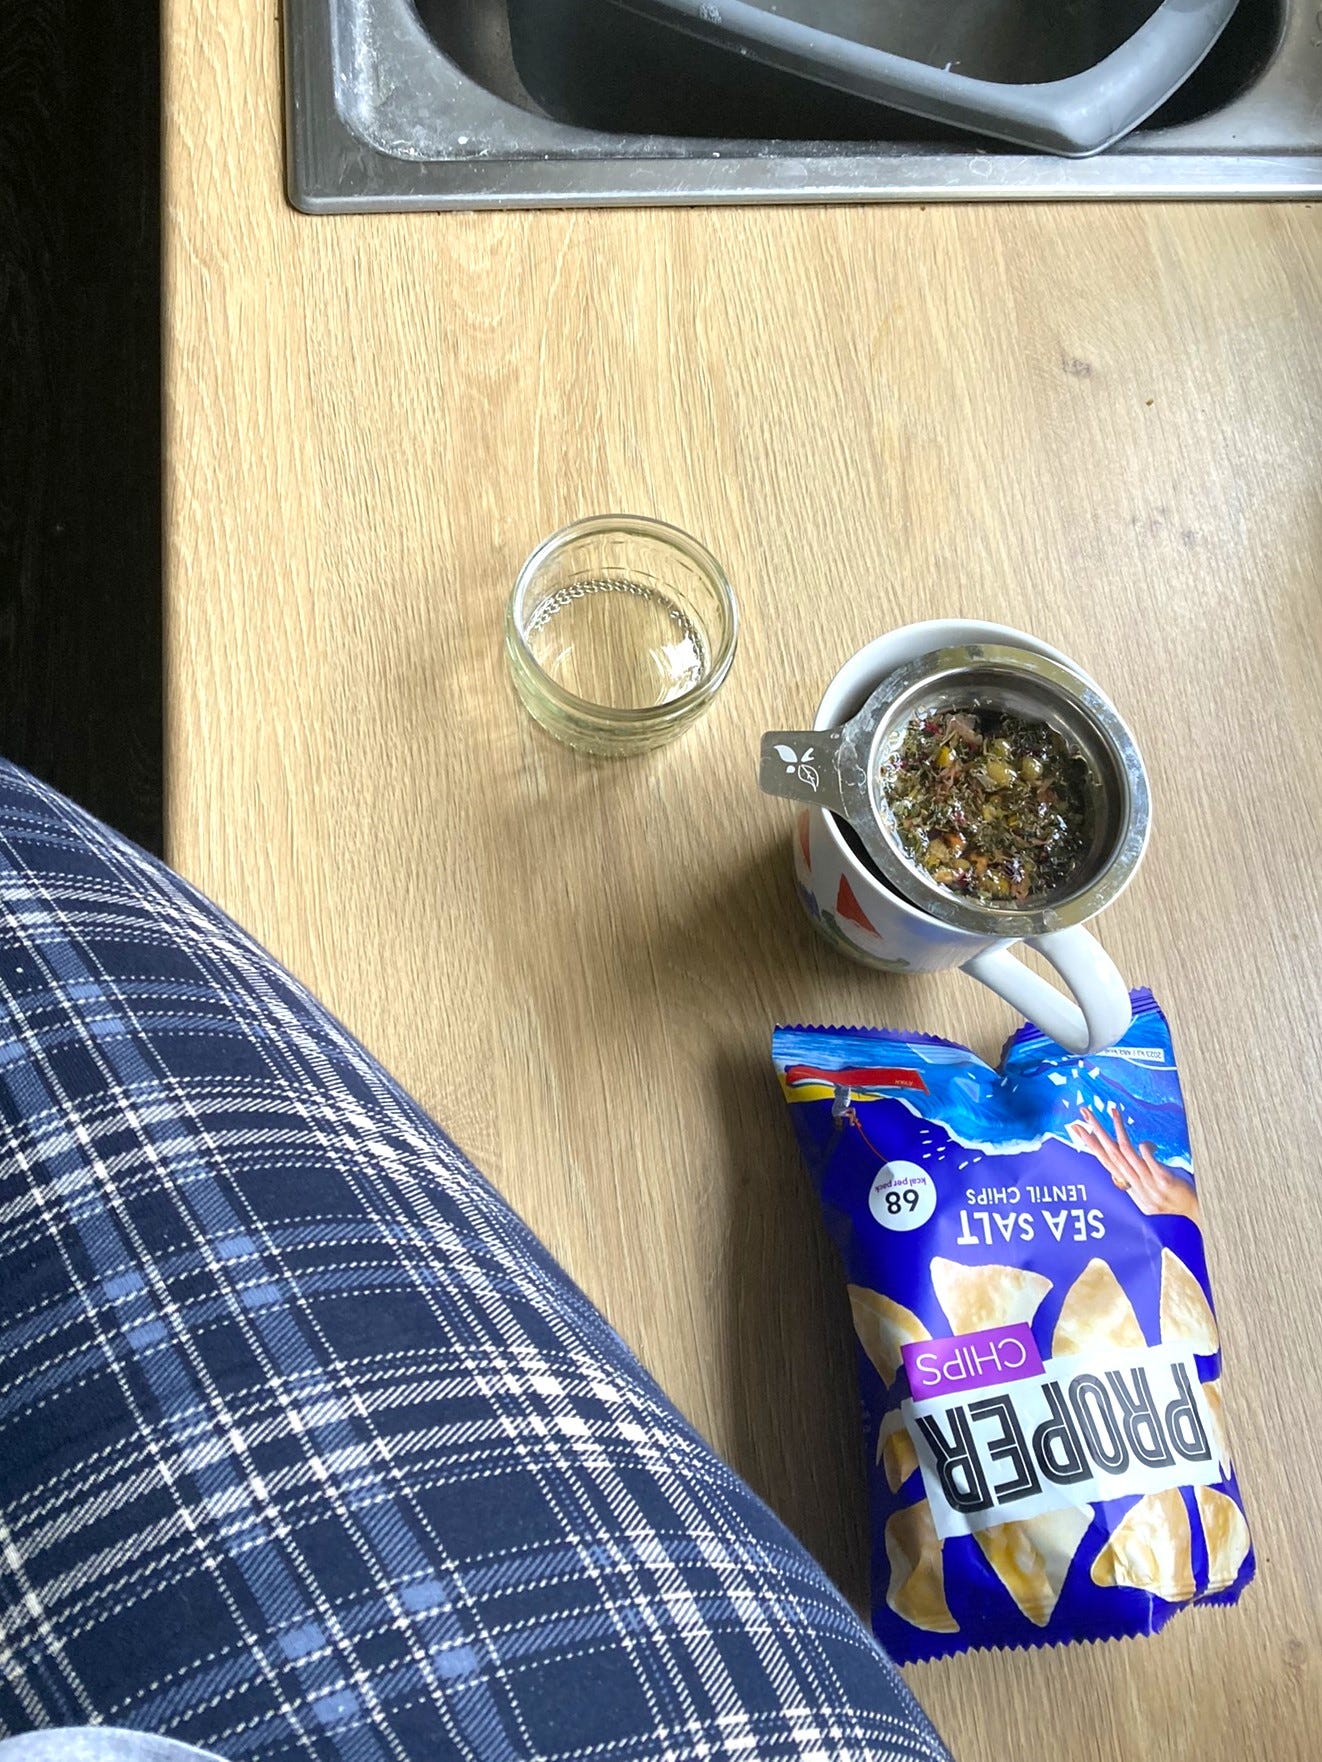 A pyjama-clad leg can be seen in the bottom left corner. She's sat on the kitchen counter with a packet of lentil crisps and a mug of loose leaf tea brewing.